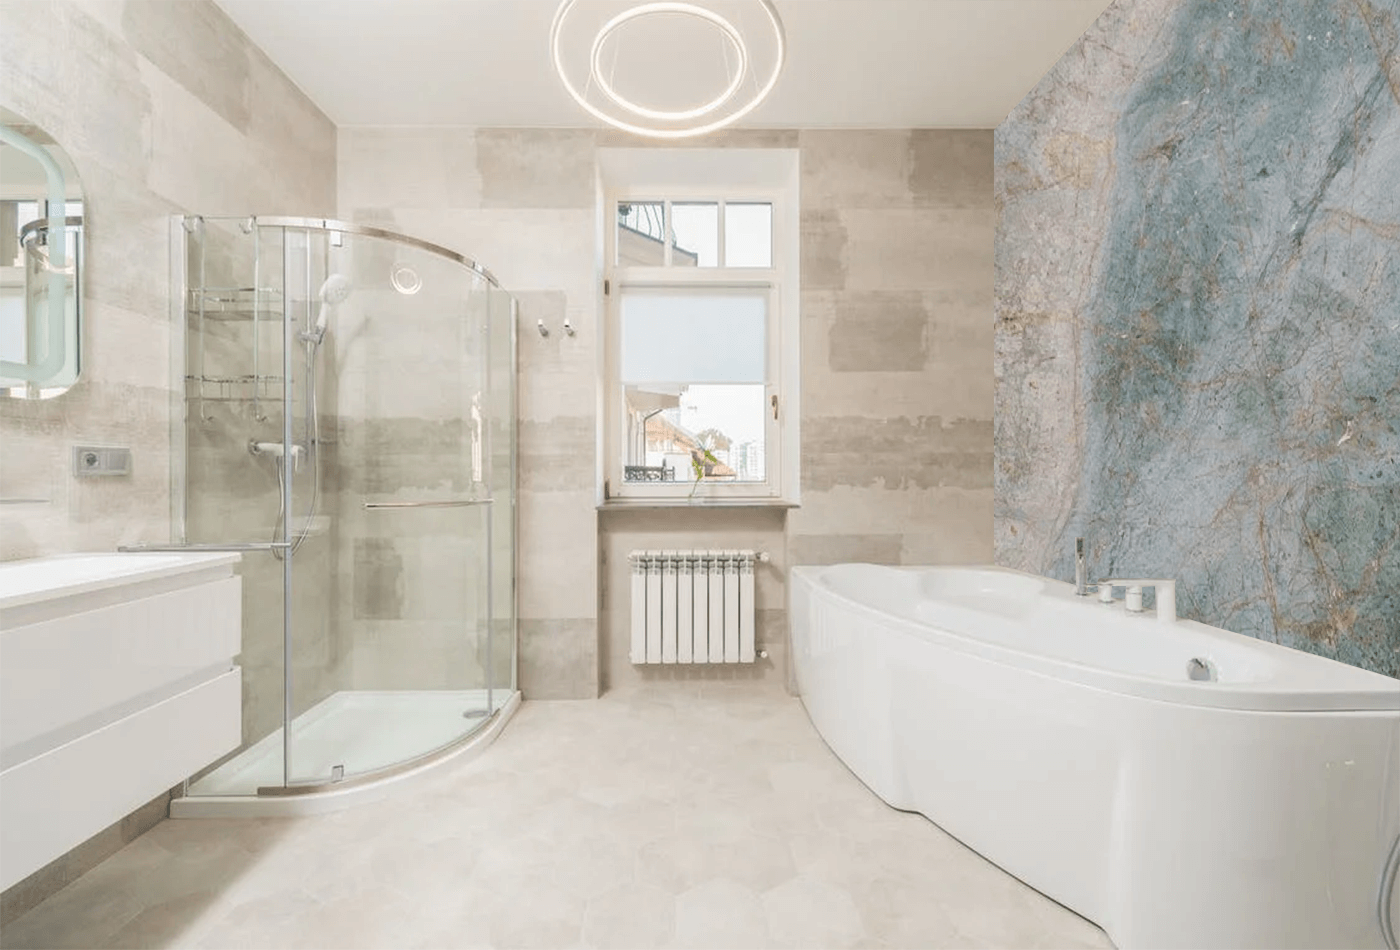 Firozeh Marble Wall in Bathroom with White Accents